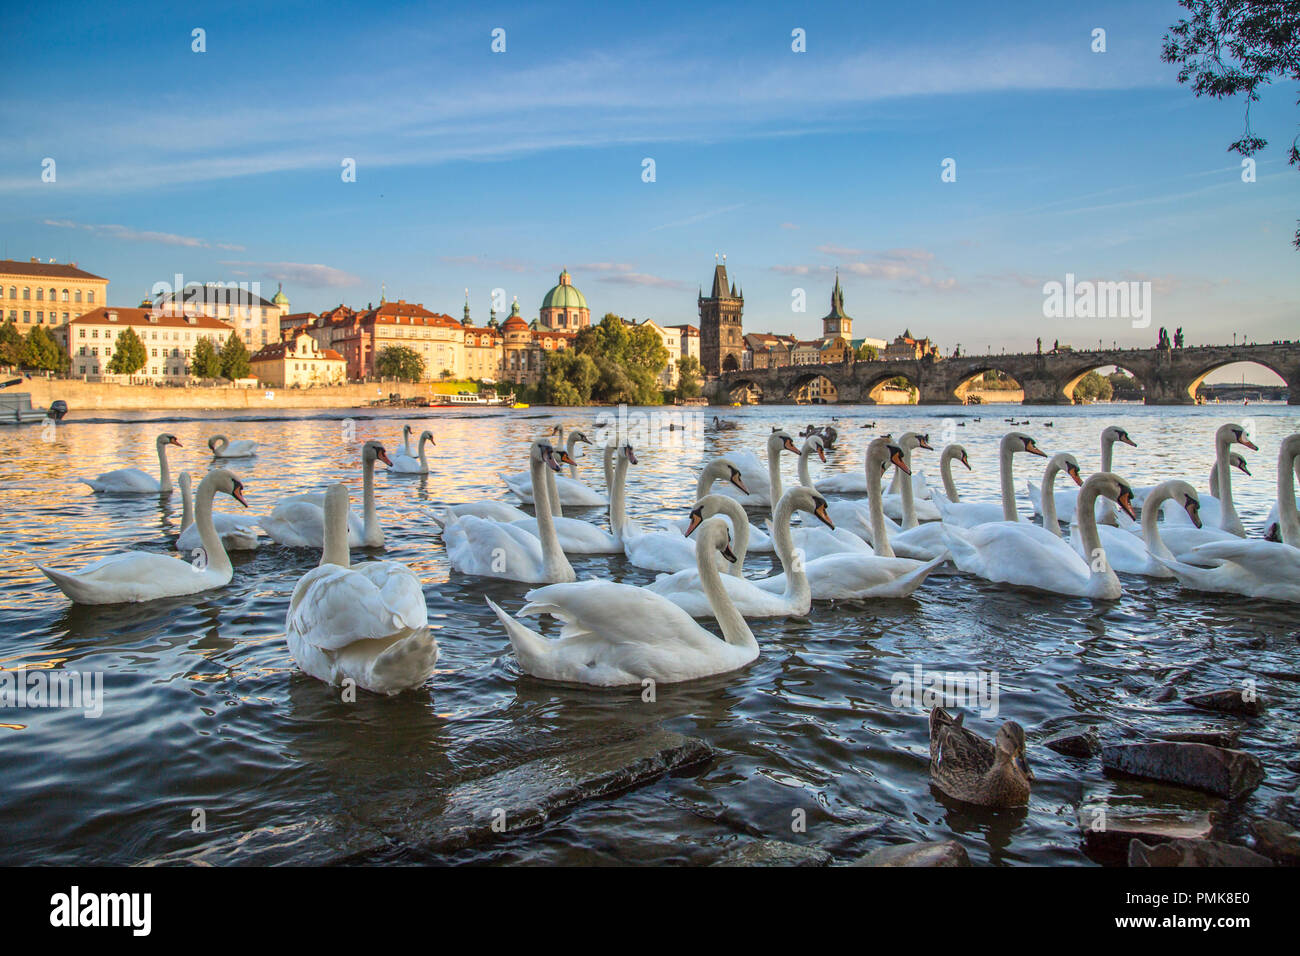 Charles Bridge and old town in Prague, Czech Republic. Stock Photo